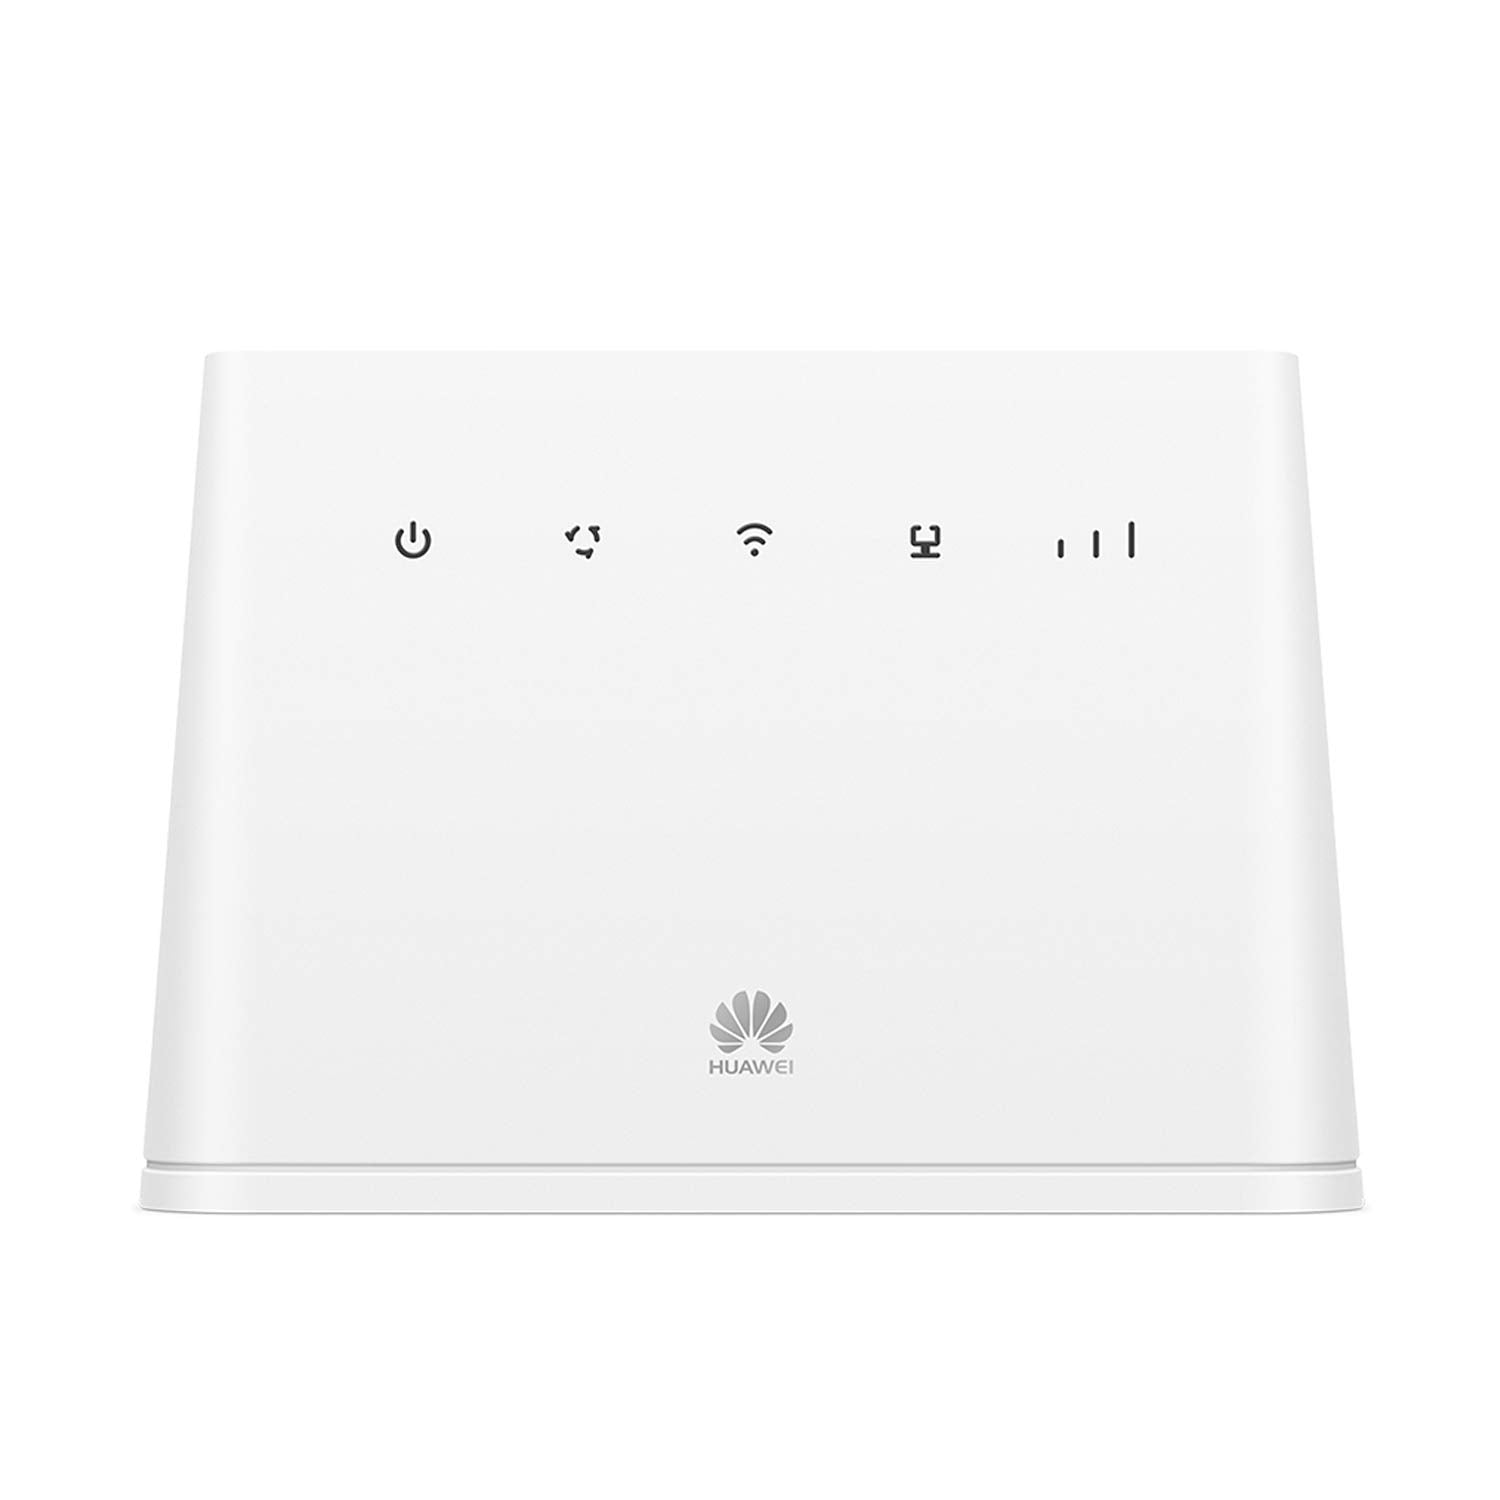 HUAWEI B311 2020, CAT 4, 4G/ LTE 150 Mbps Mobile Wi-Fi Router, Unlocked to All Networks- Genuine UK Warranty STOCK (Non Network Logo)- White